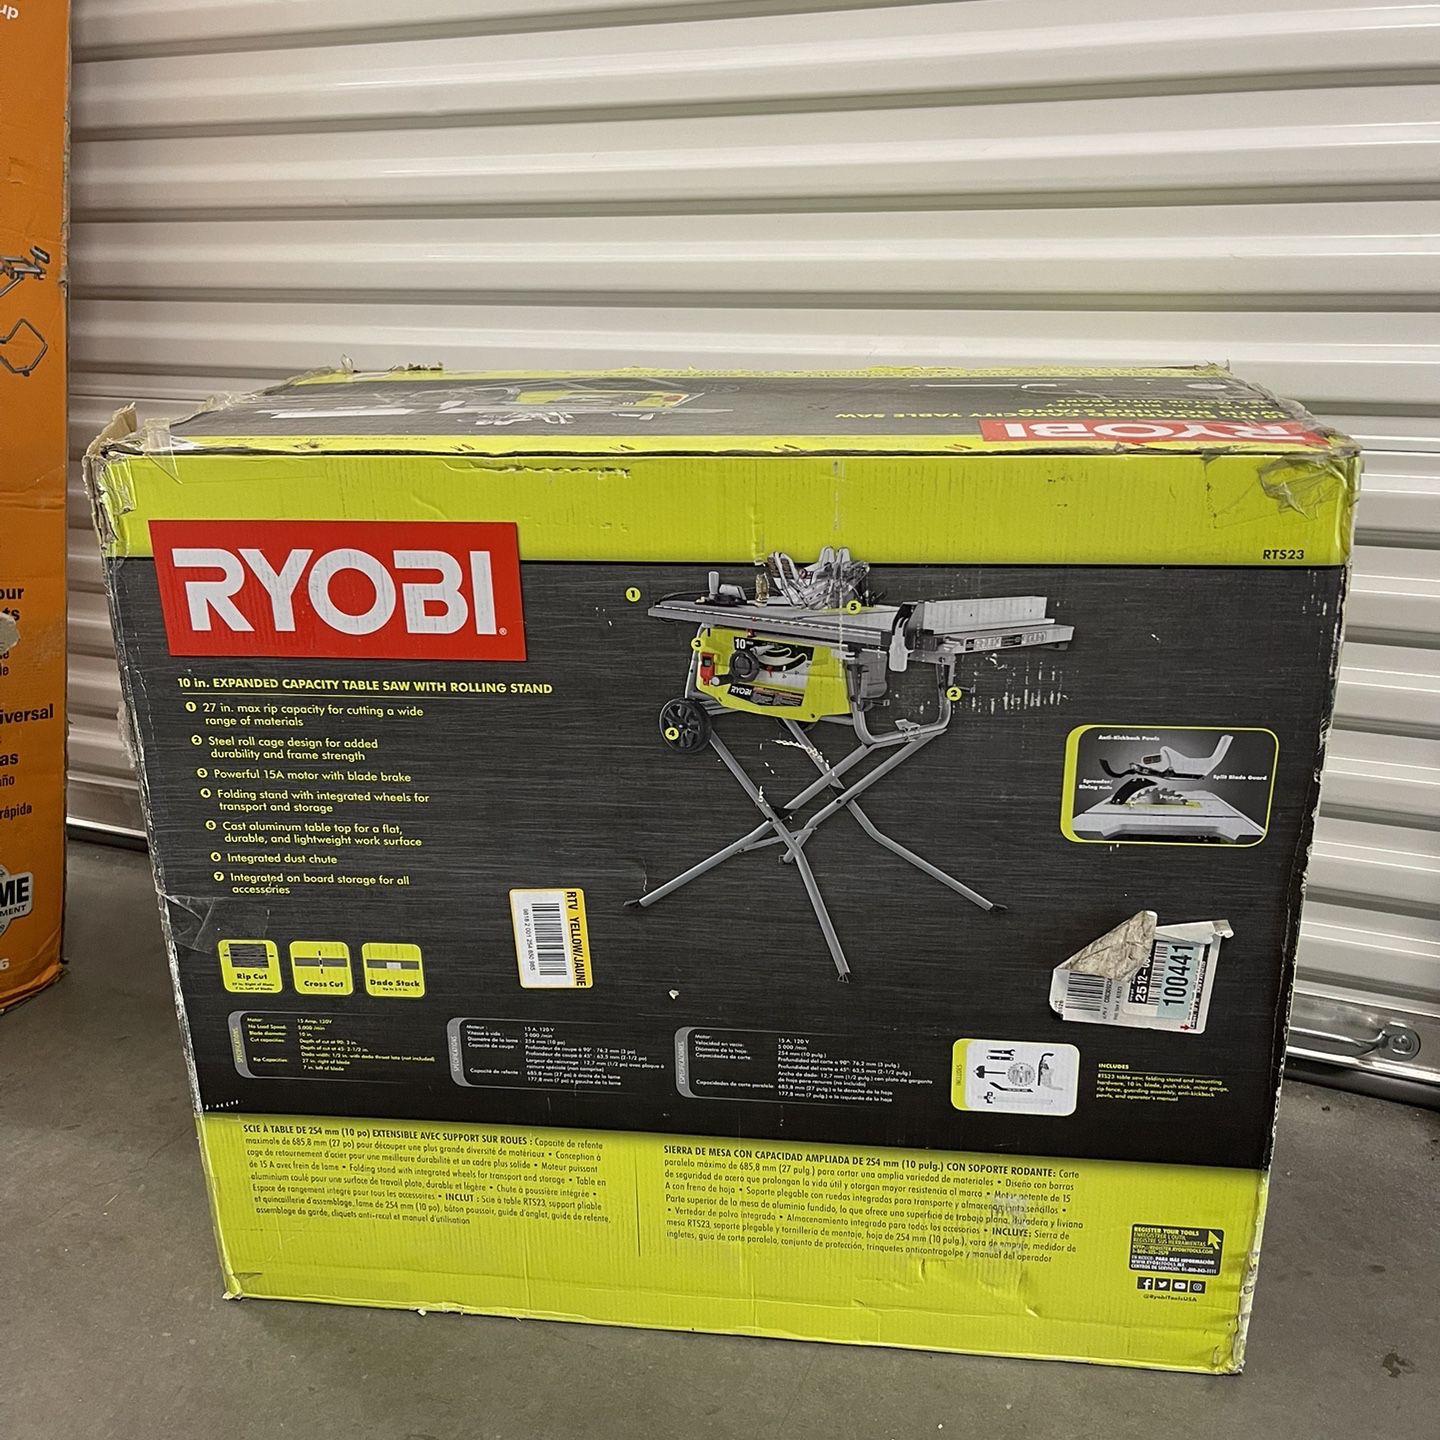 Ryobi 10” Extended Capacity Table Saw With Rolling Stand